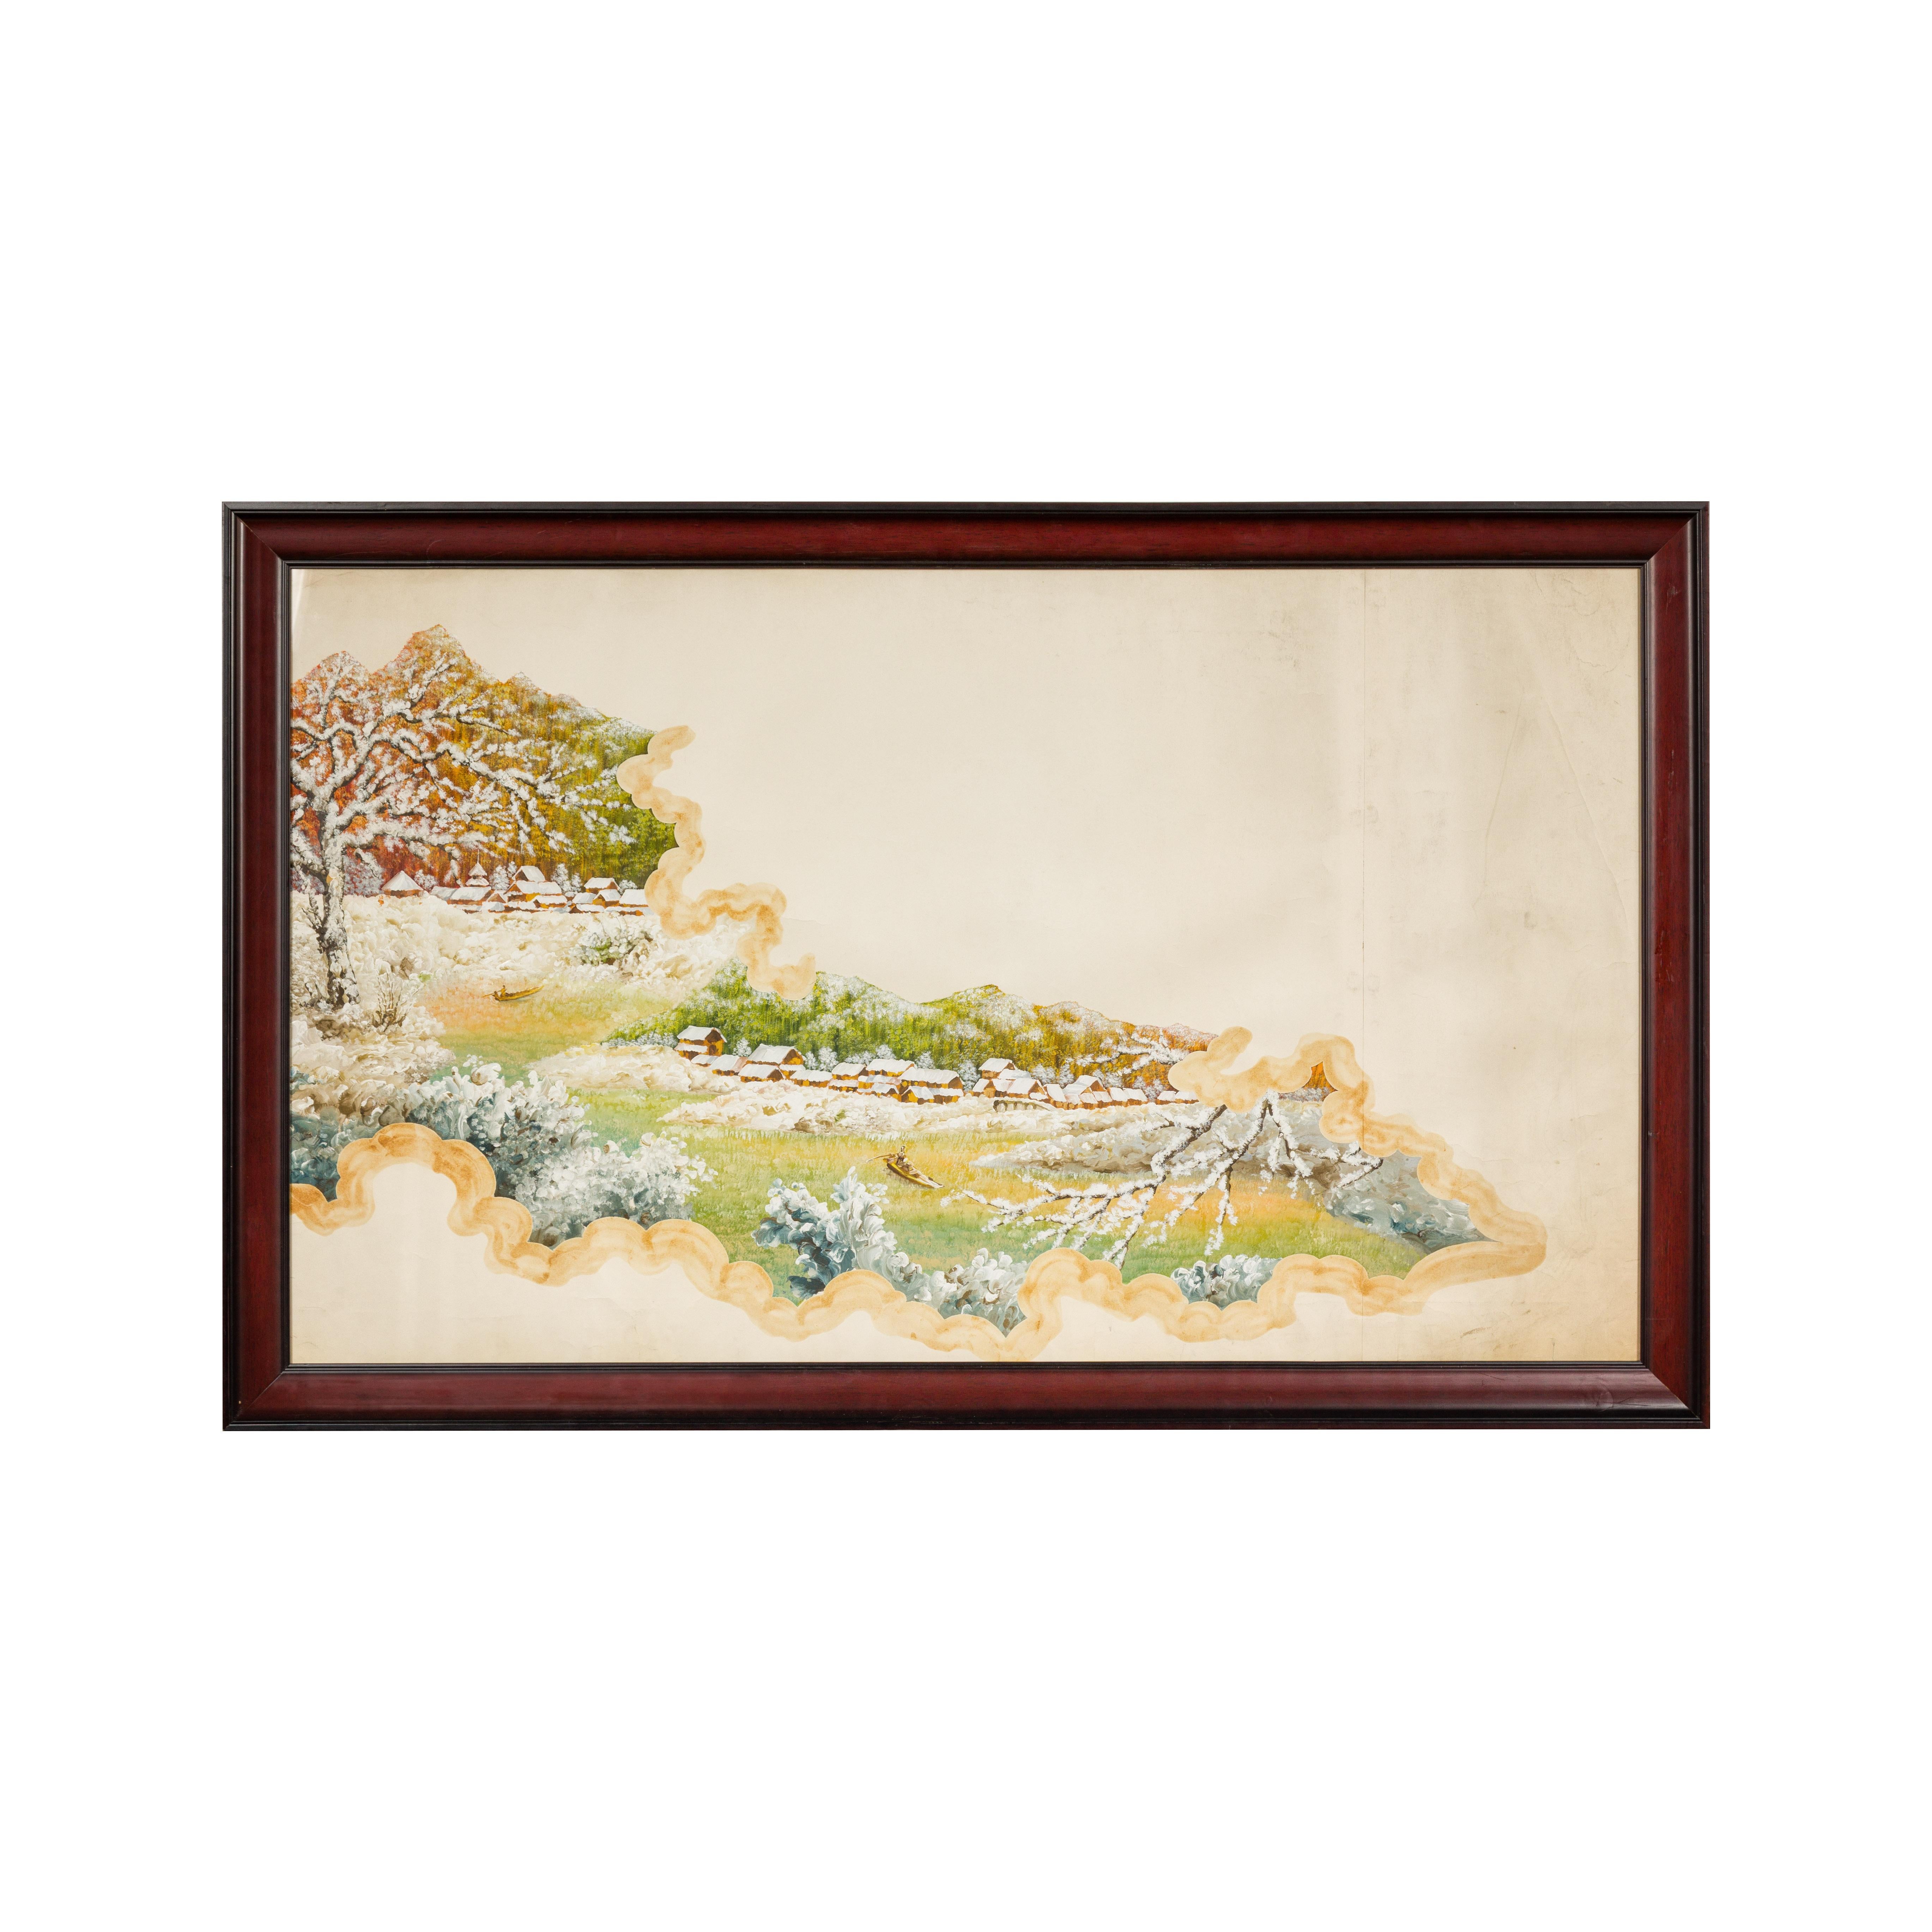 A large antique Japanese hand-painted village landscape scene set in custom frame under glass. This large antique Japanese village landscape painting captures the tranquil beauty of a snowy village enveloped by lush vegetation, evoking a sense of